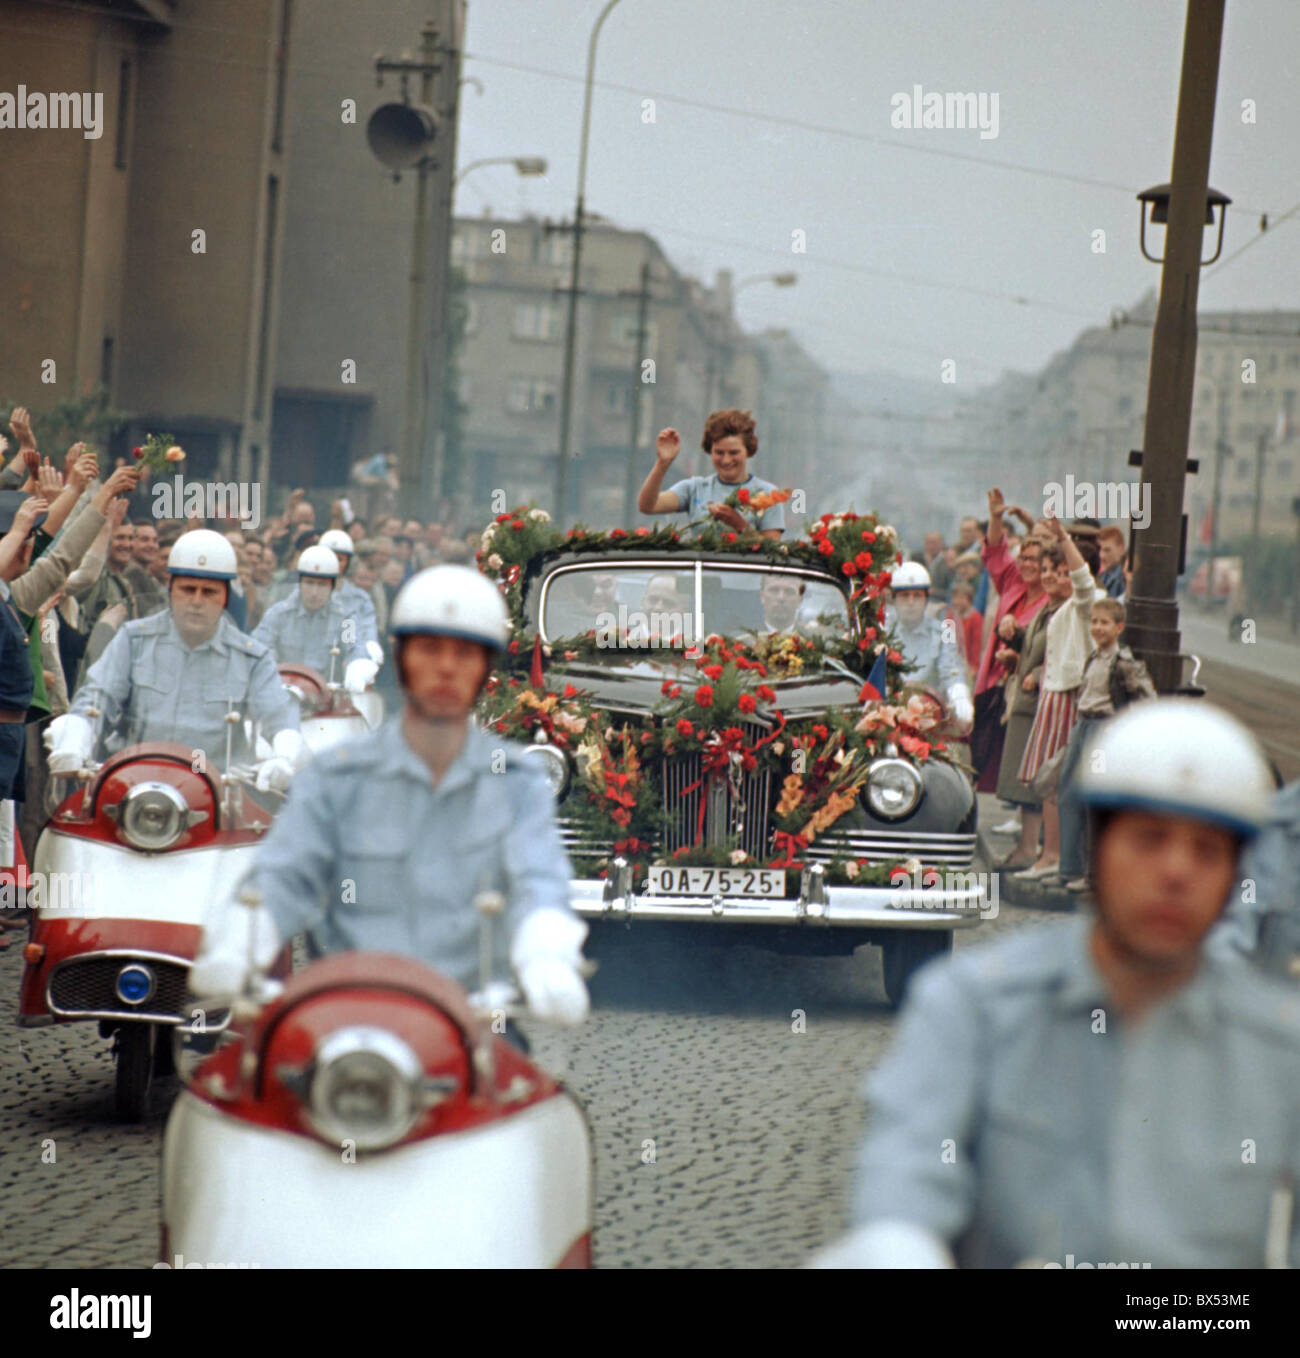 Motorcade 1963 High Resolution Stock Photography and Images - Alamy